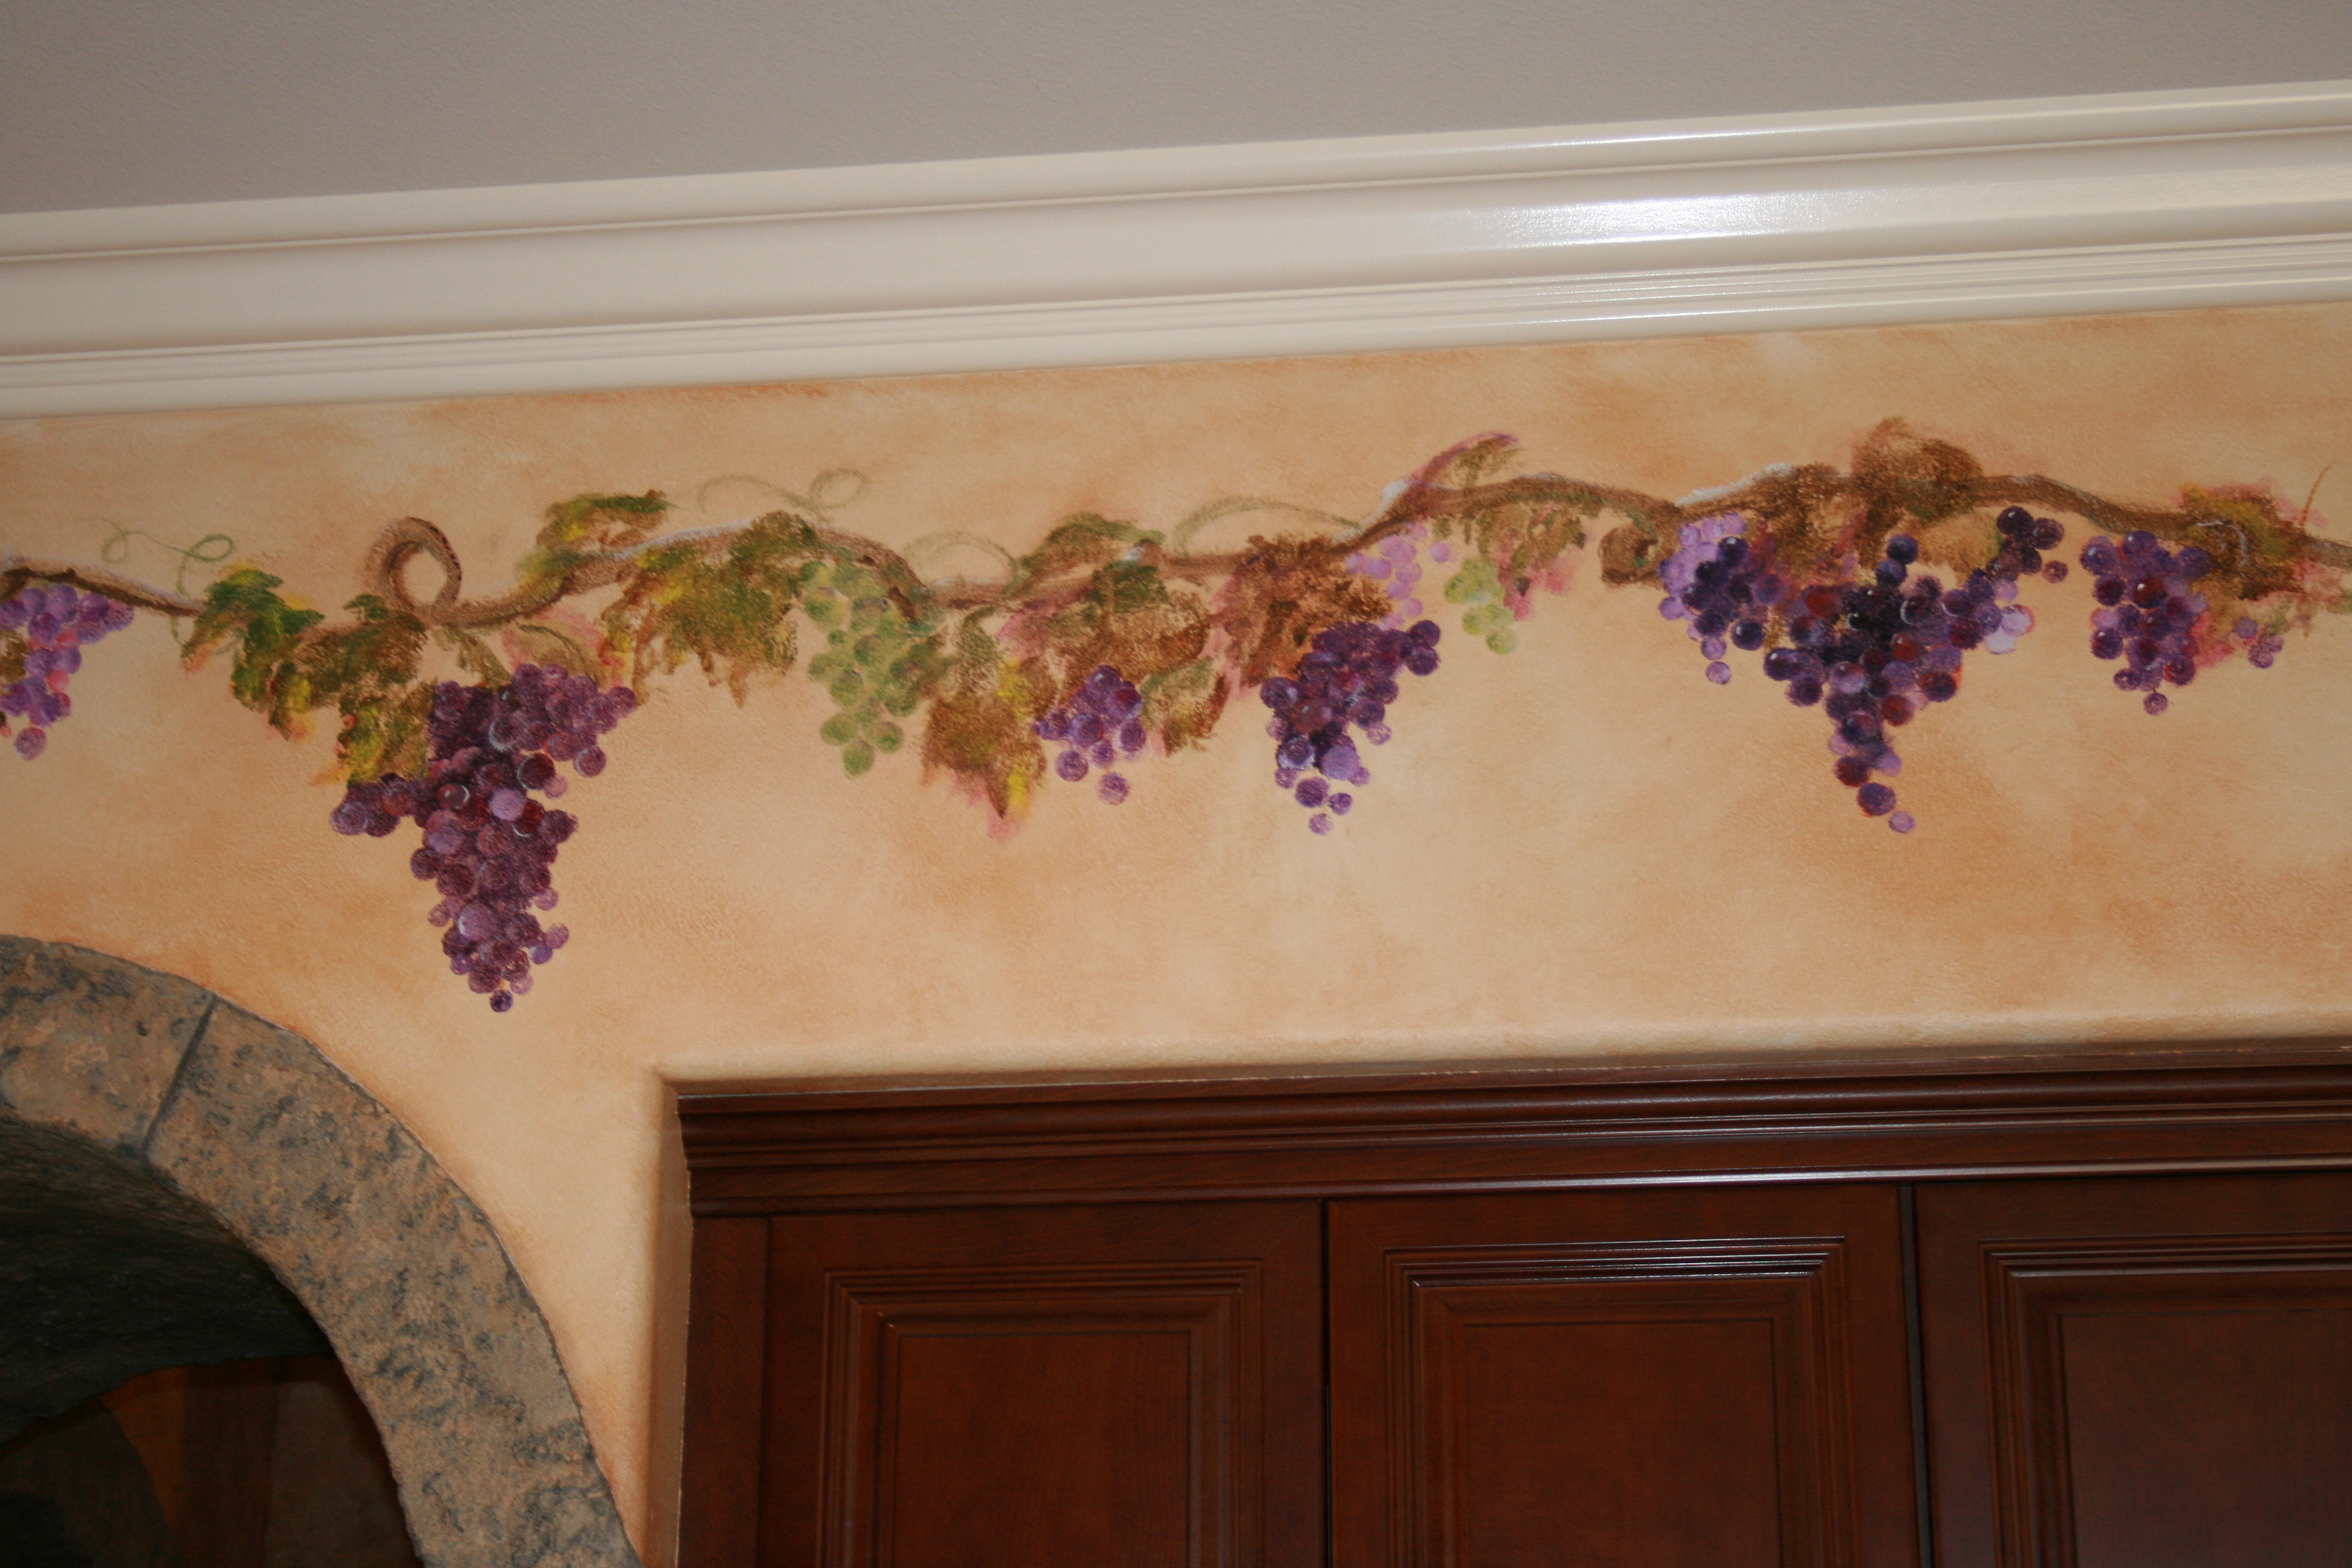 Hand painted grapes on the vine - Faux finish texture and colored wall - Vines & Scrolls - By Lisa B